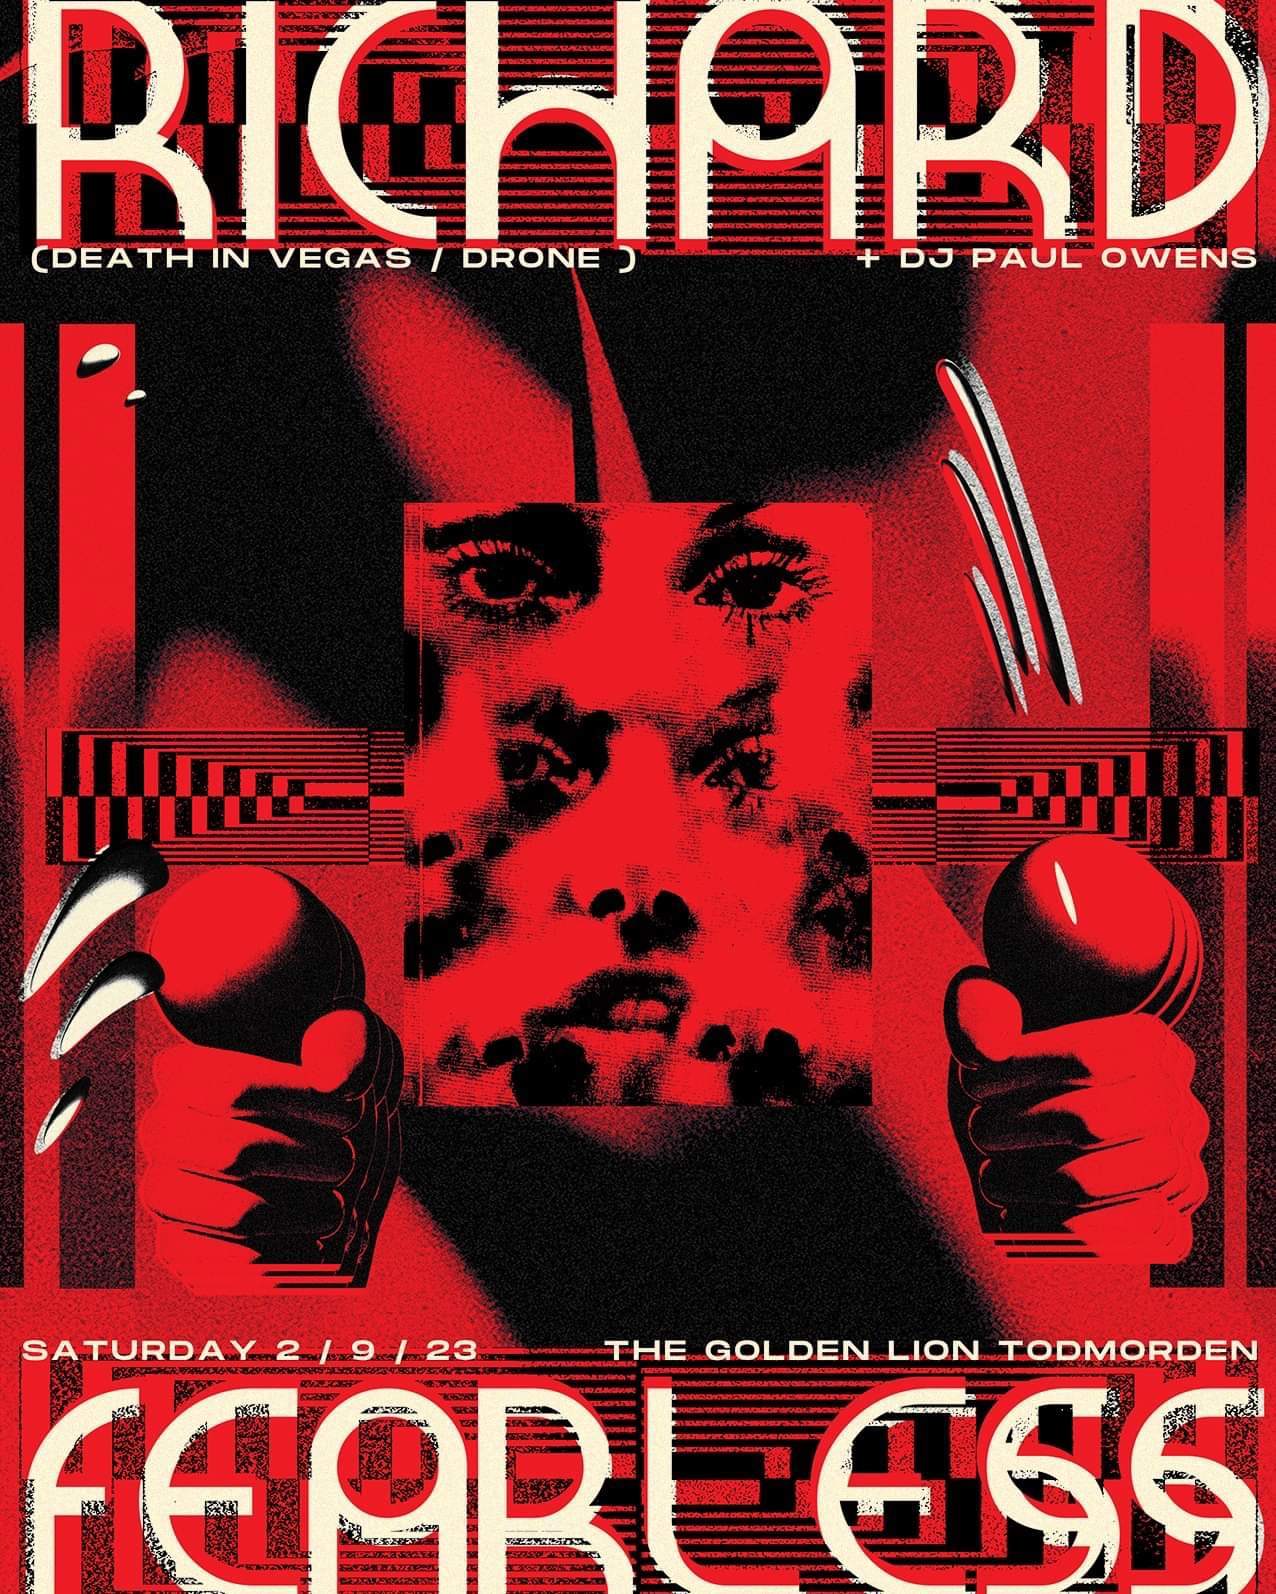 [CANCELLED] Richard Fearless (Death in Vegas / Drone) at Golden Lion, Todmorden - Página frontal